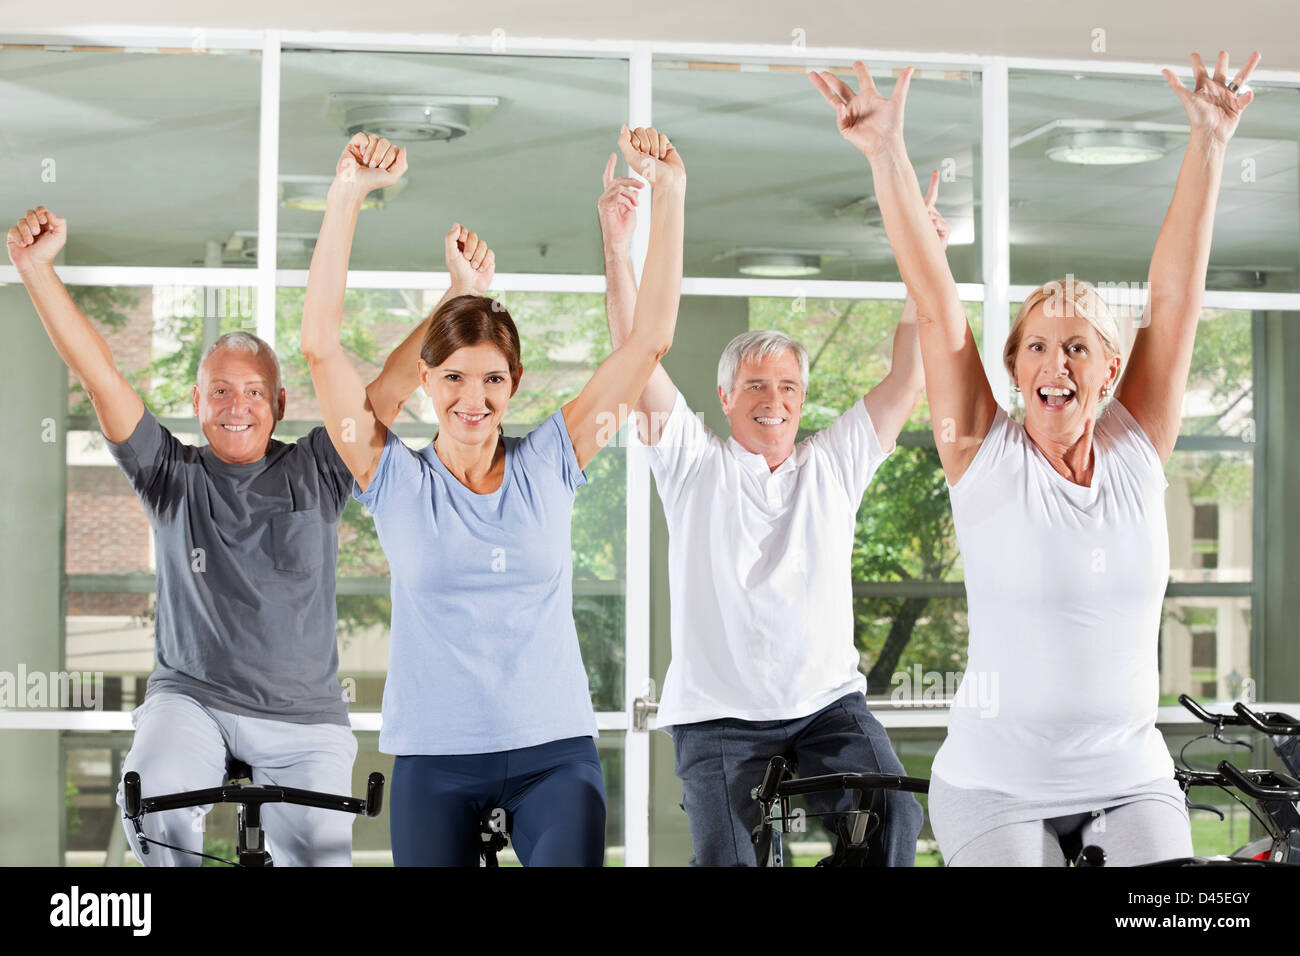 Happy cheering senior group in fitness center on spinning bikes Stock Photo